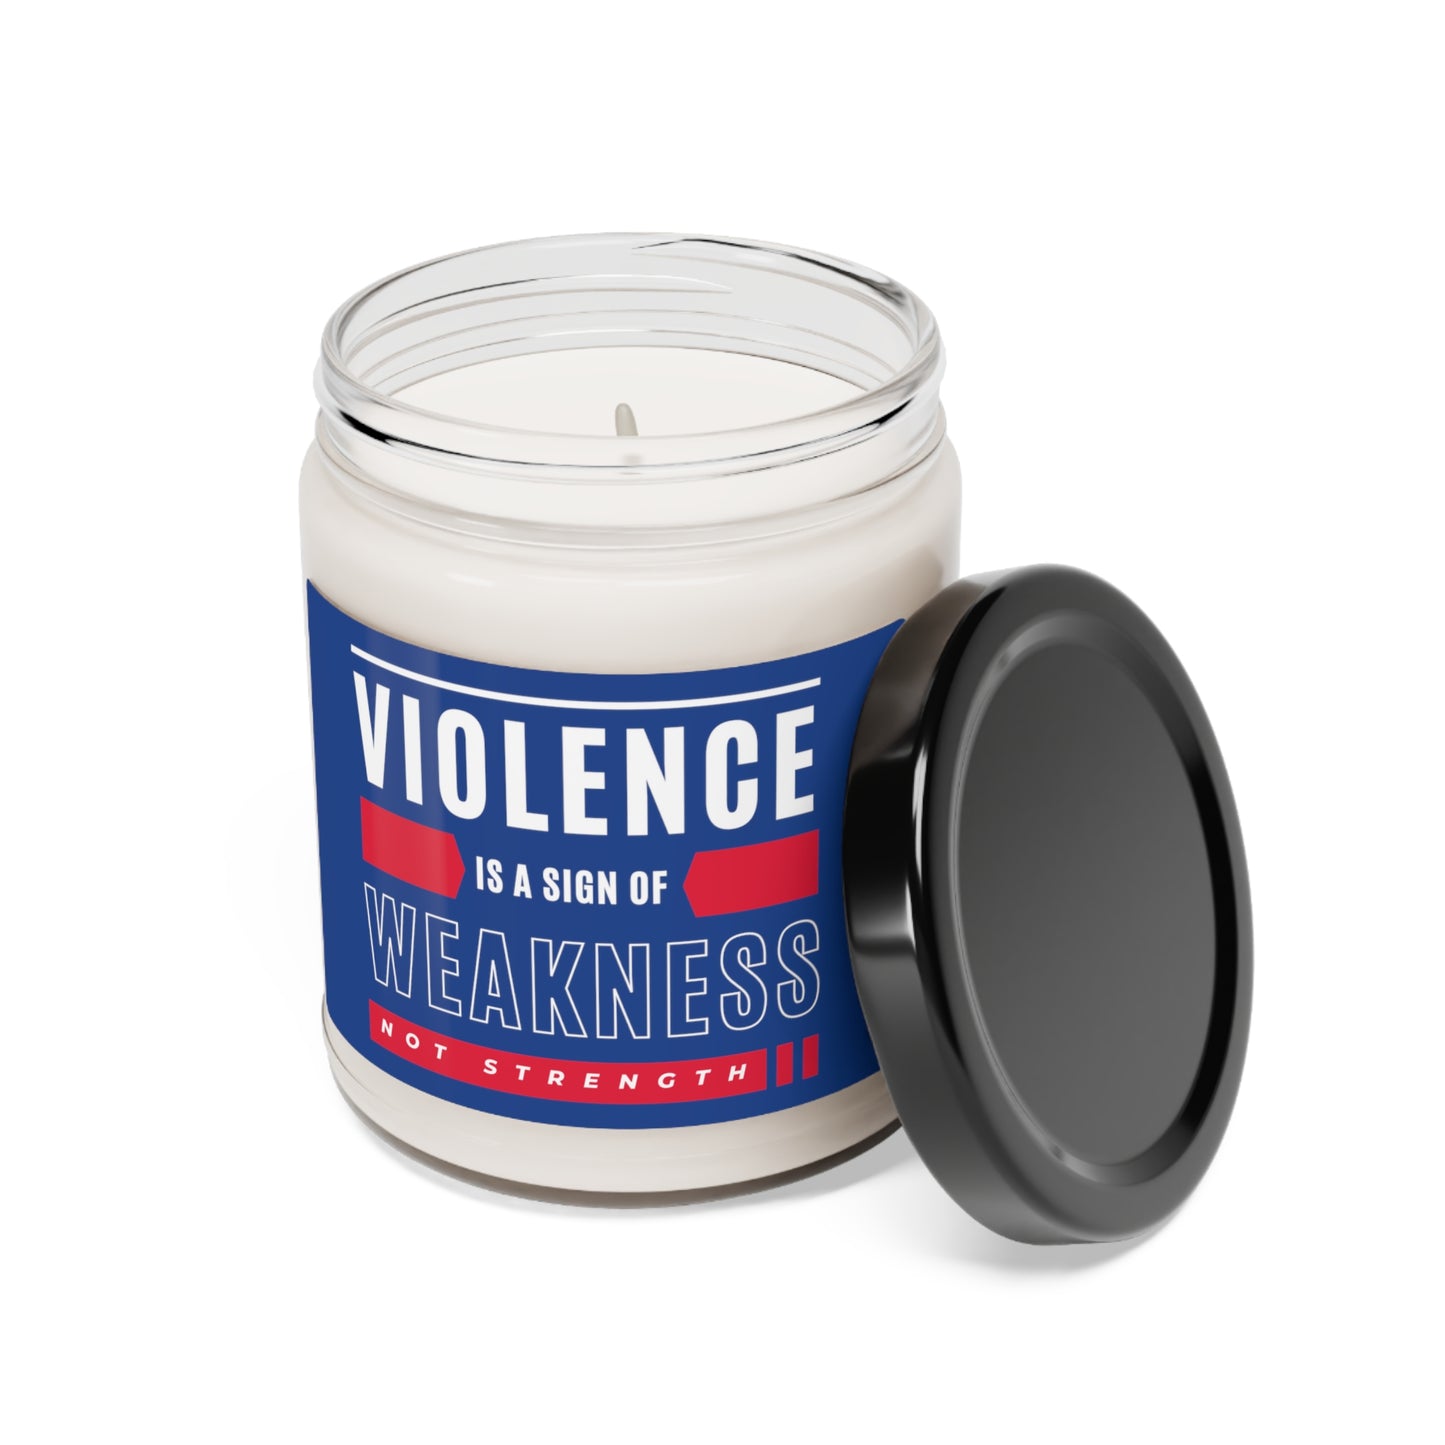 Strength in serenity. This candle is an excellent accent piece for your home decor, sending a clear message that violence is never the answer. 